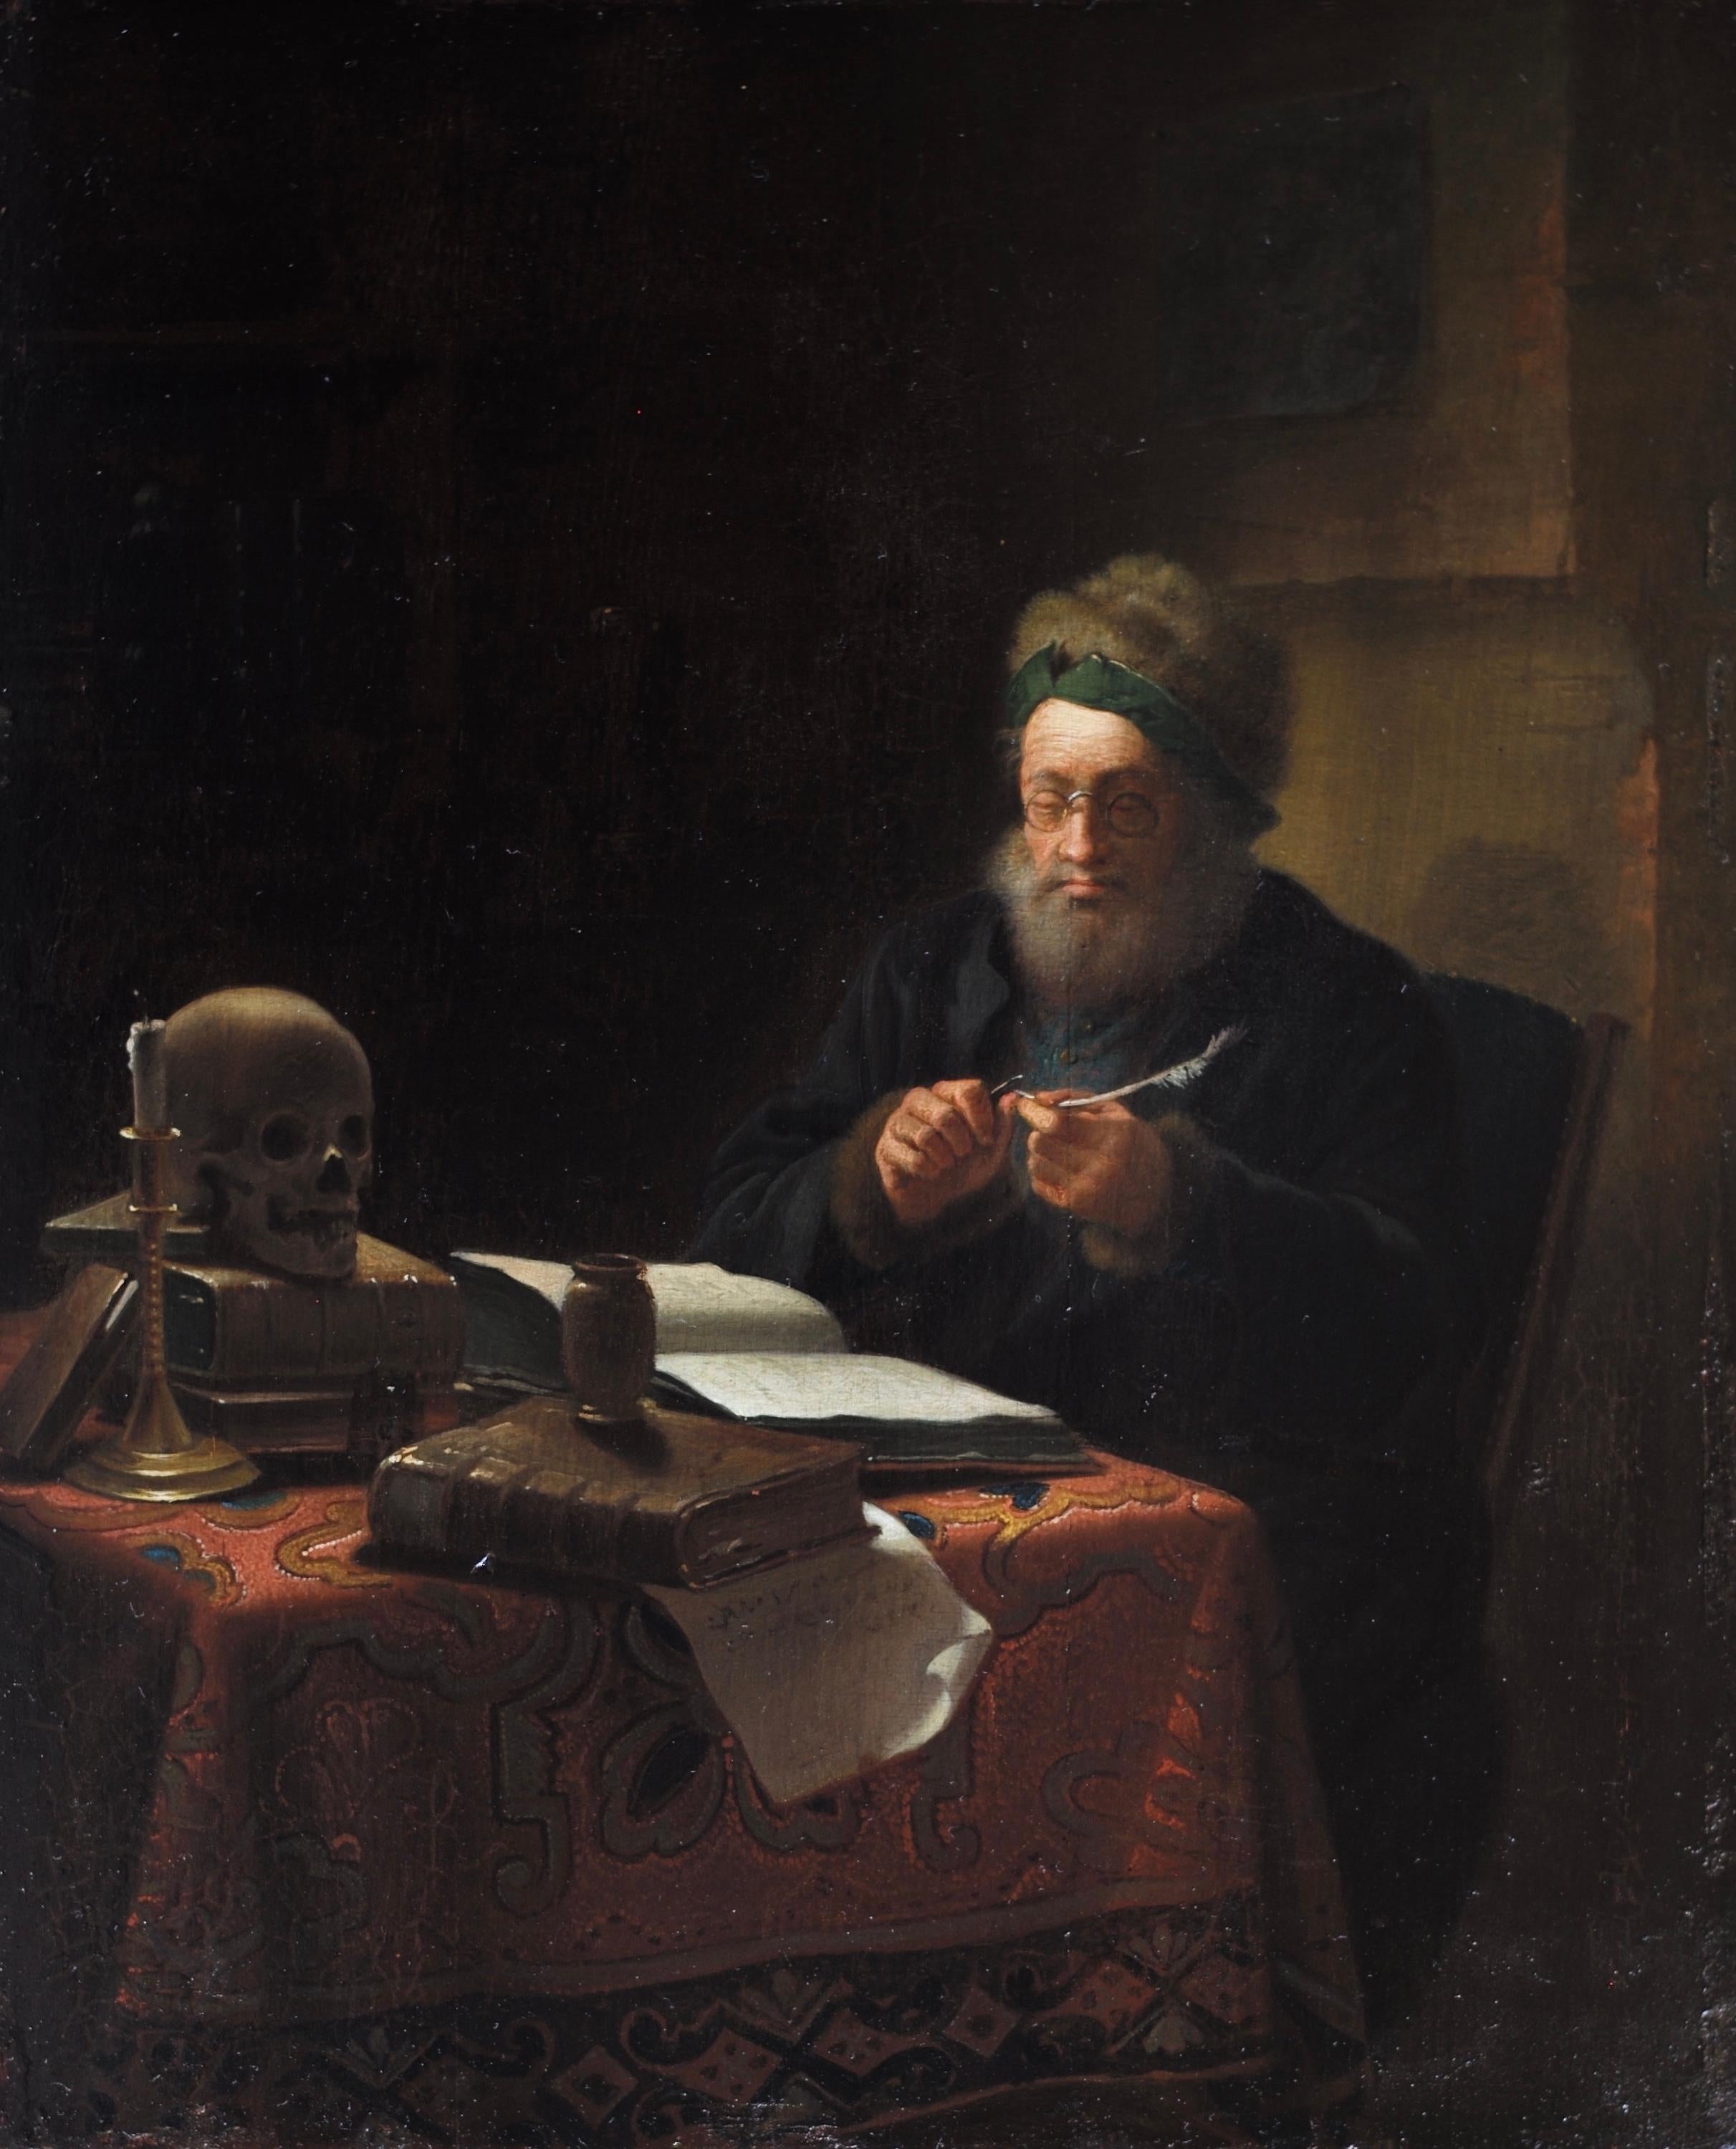 Scholar Sharpening His Quill Penn Attributed to Justus Juncker, Oil on Panel